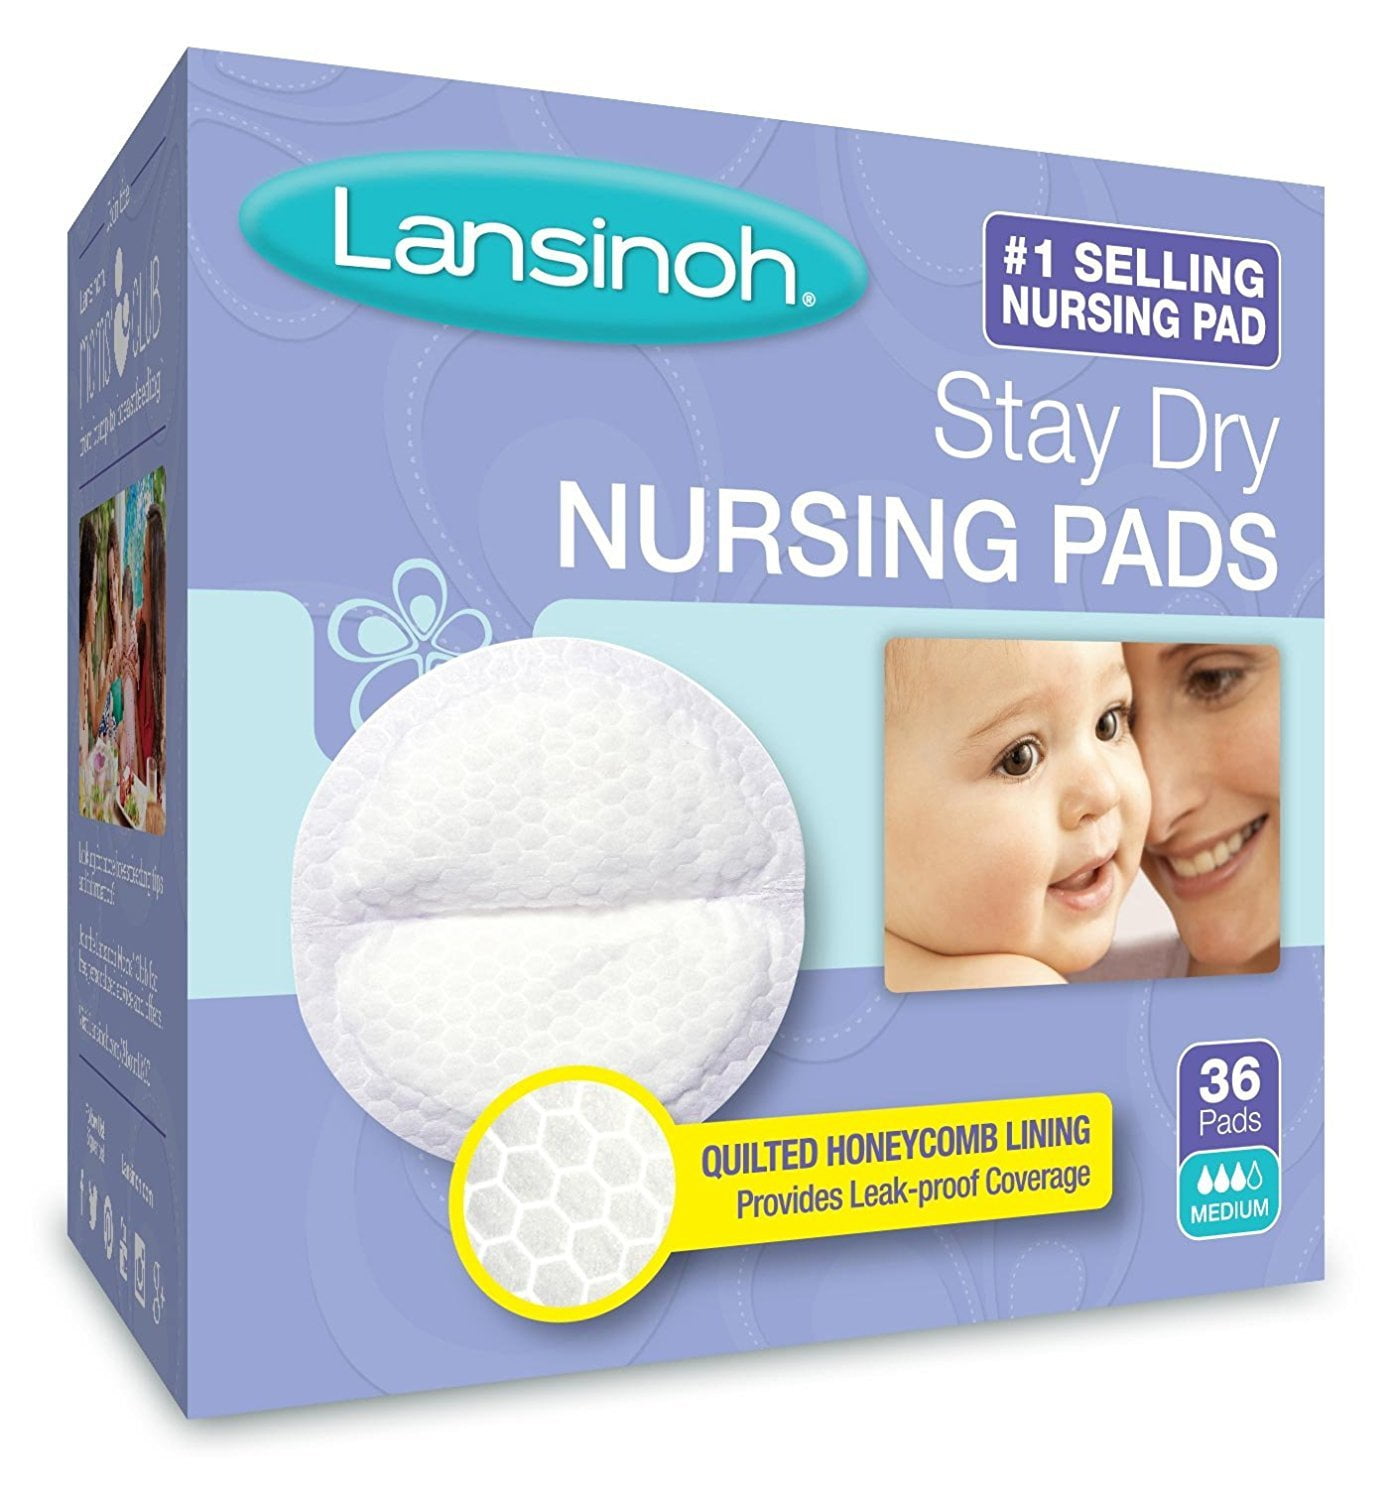 Lansinoh Stay Dry Disposable Nursing Pads, Number One Selling